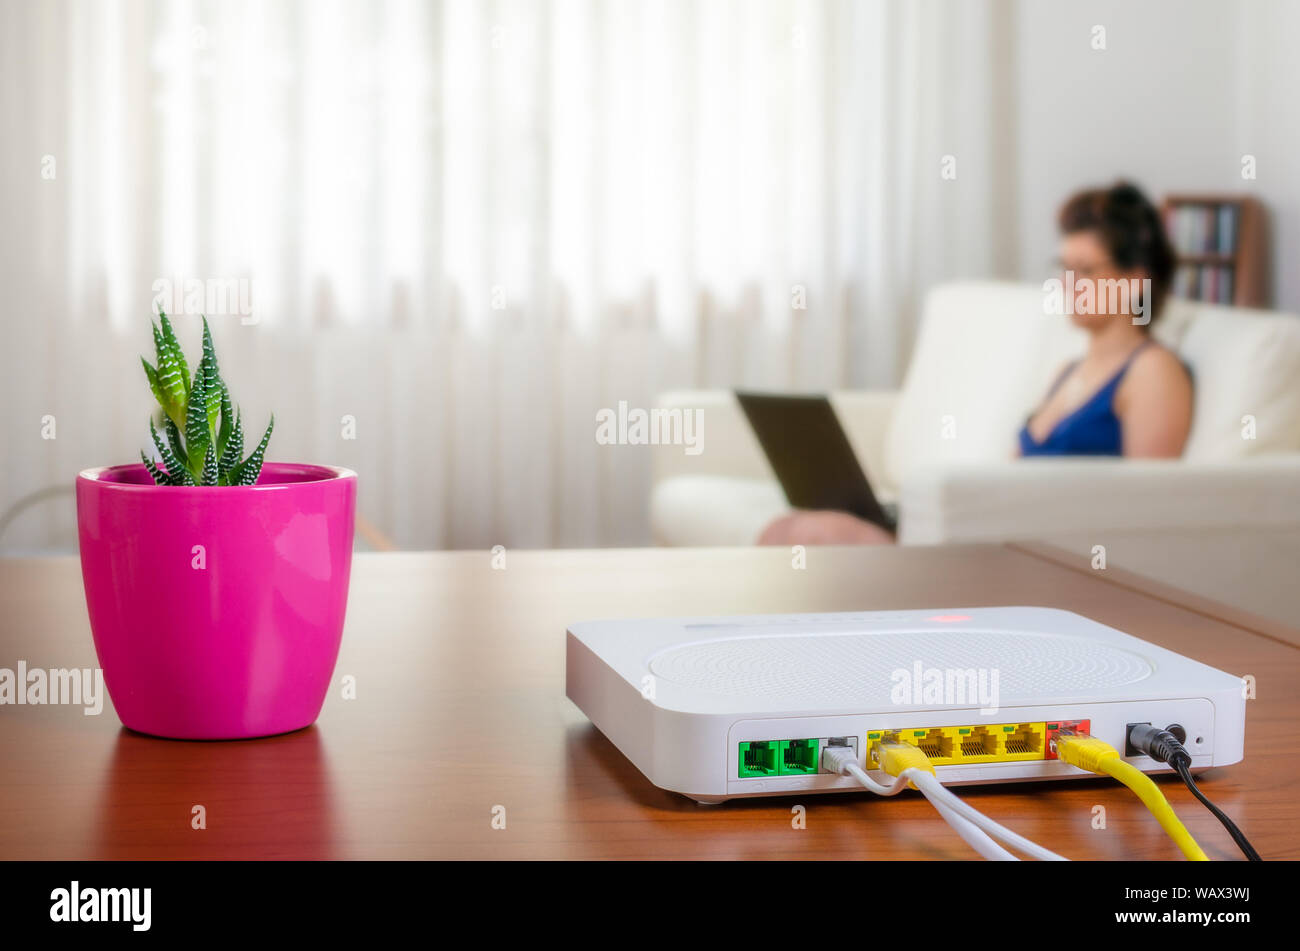 Modem router on a table in a living room with a woman using a laptop while  sitting on a sofa in background Stock Photo - Alamy